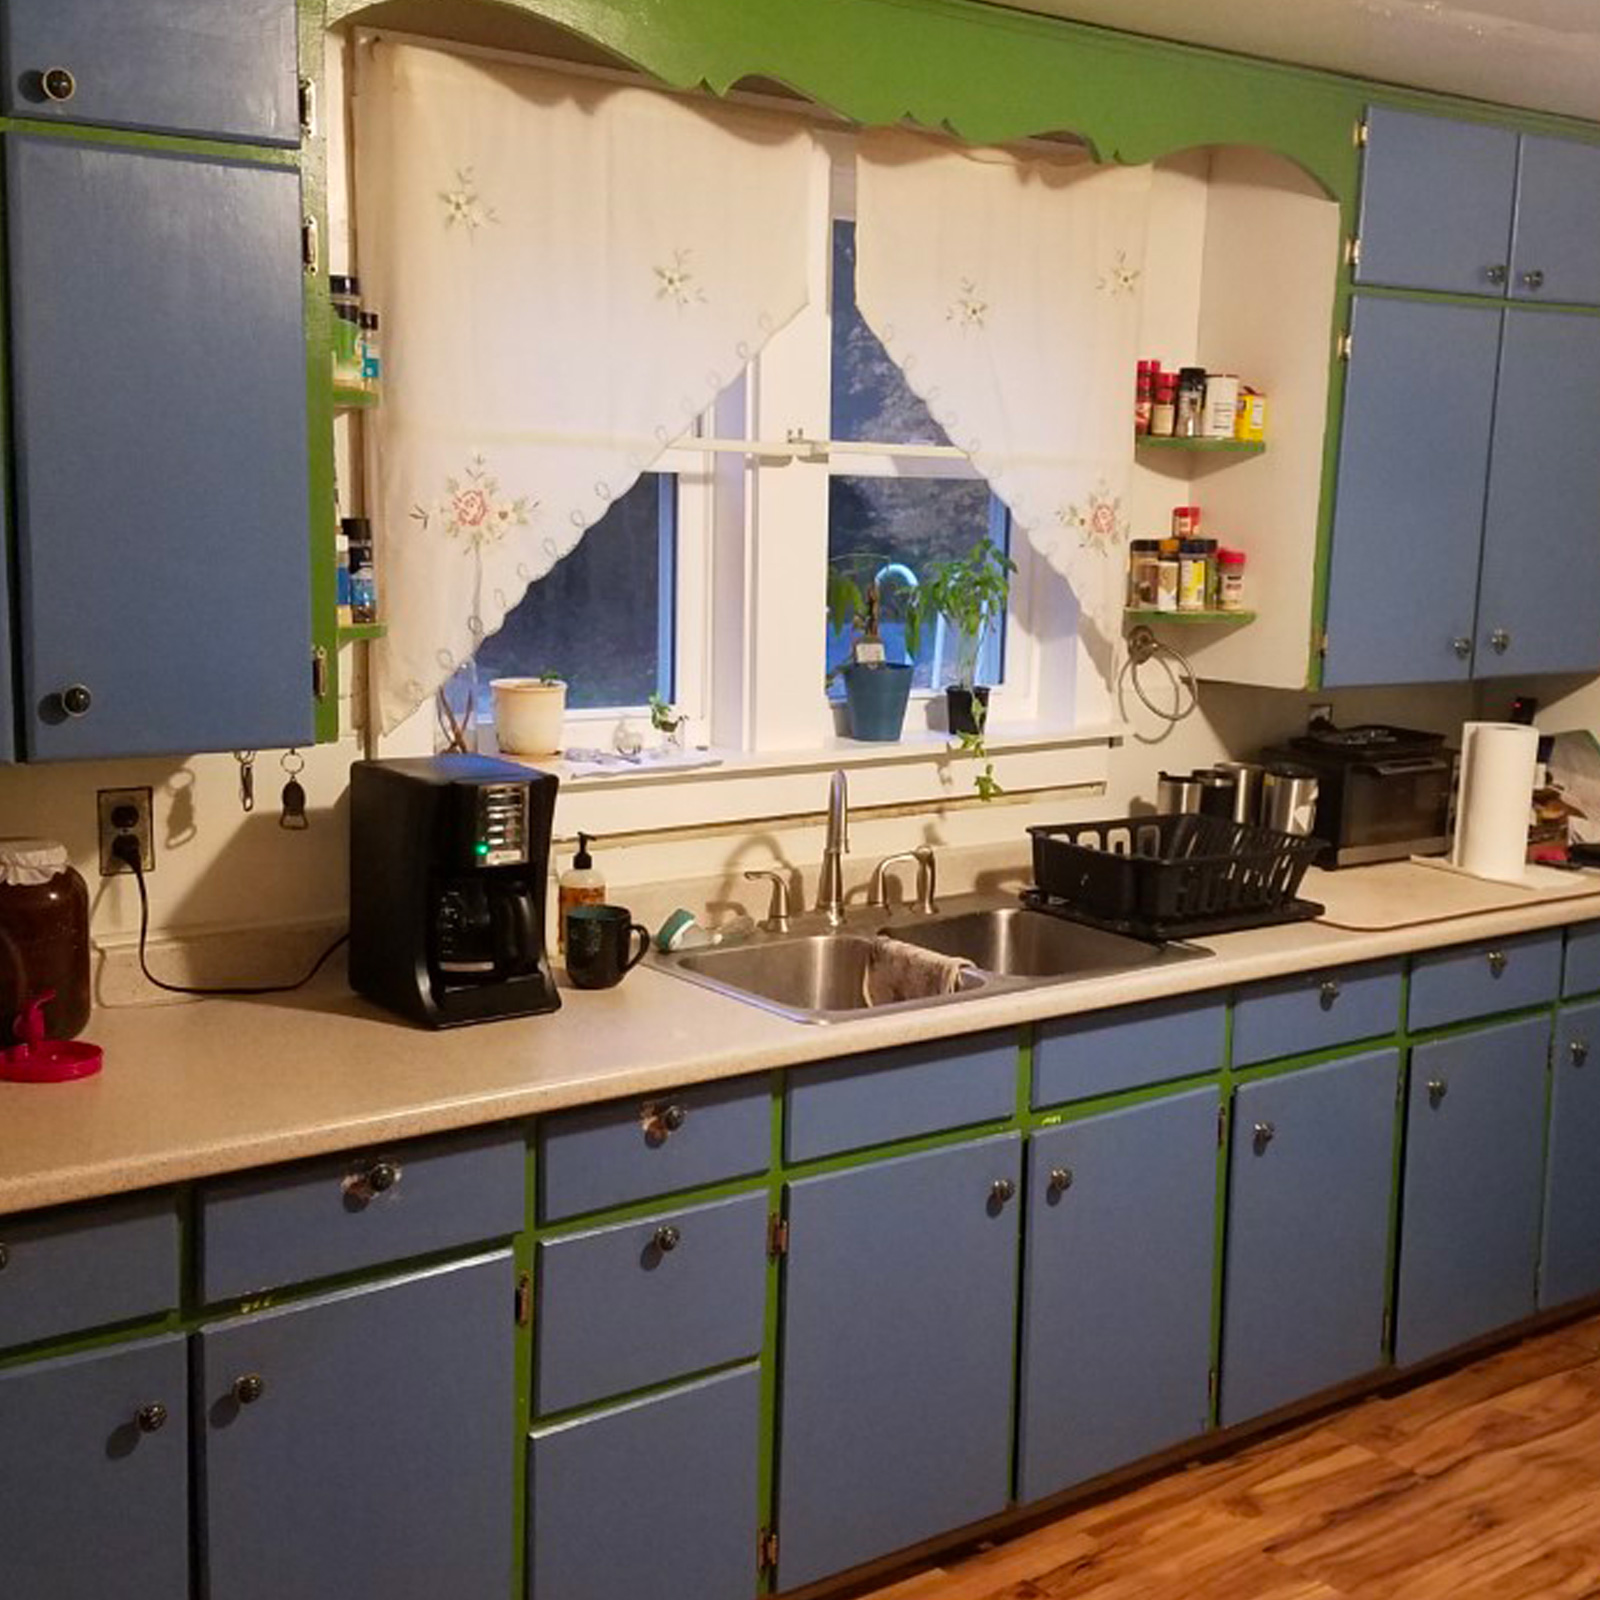 Entry 105 - These old, painted cabinets are in desperate need of a renovation